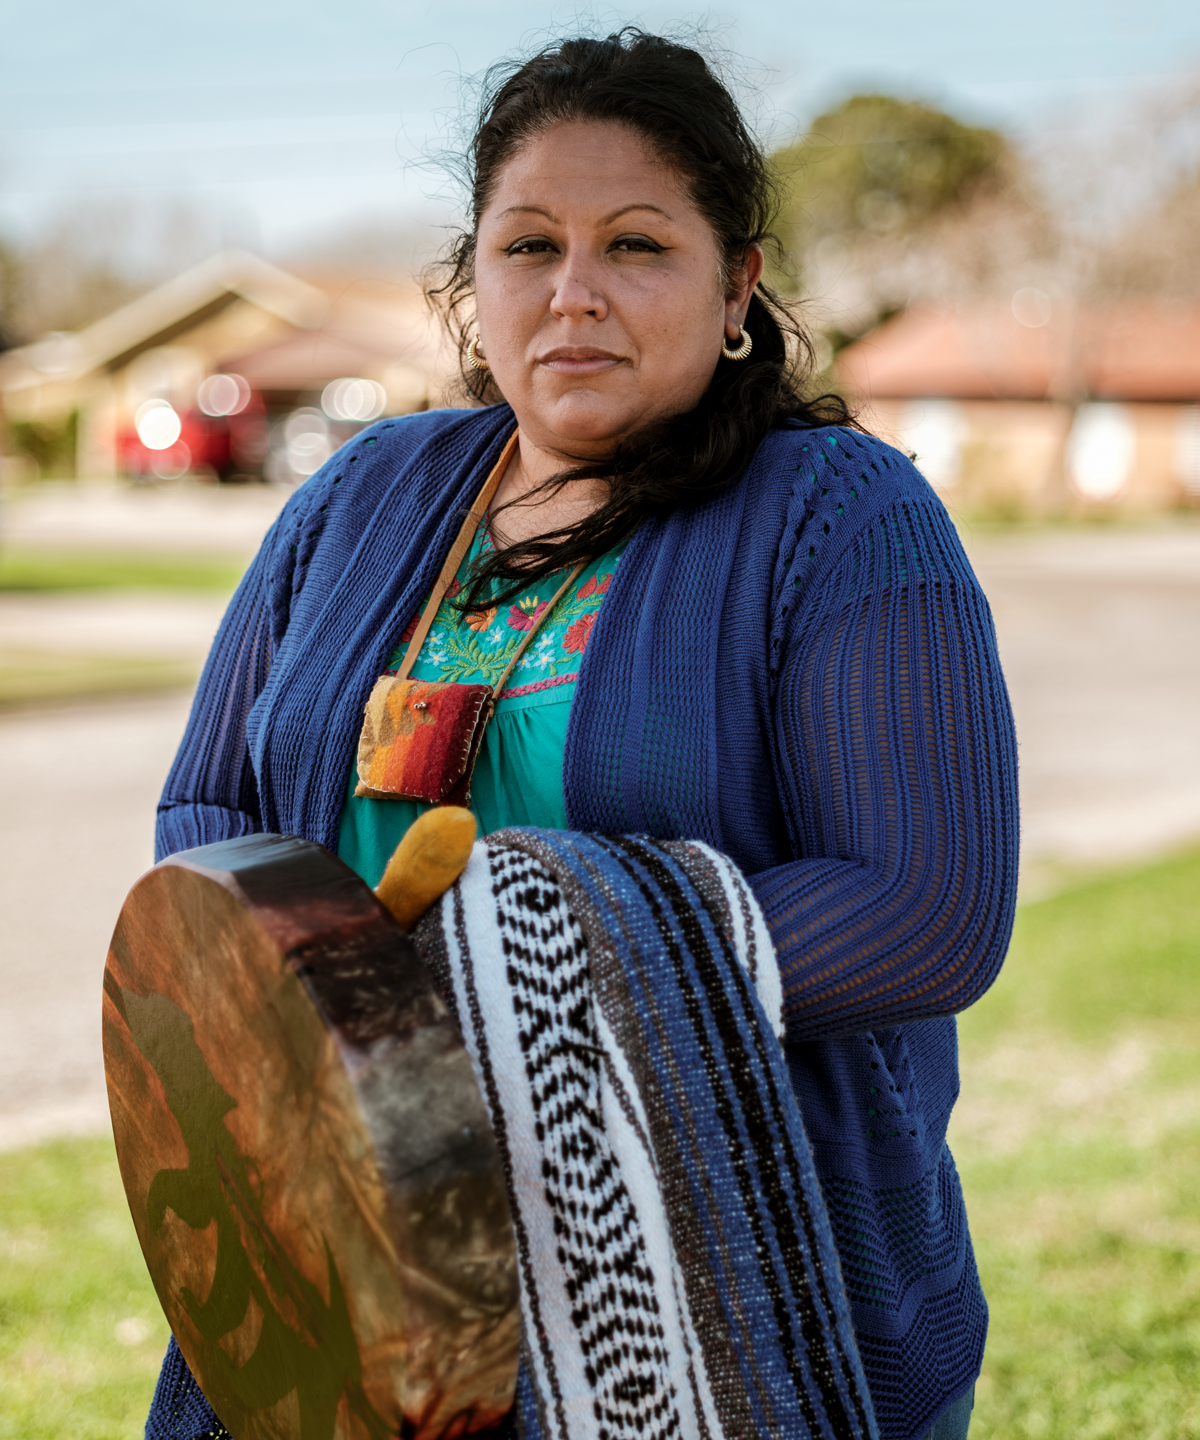 Love Sanchez looks at the camera, wearing a blue cardigan and holding a drum and blanket in front of her.